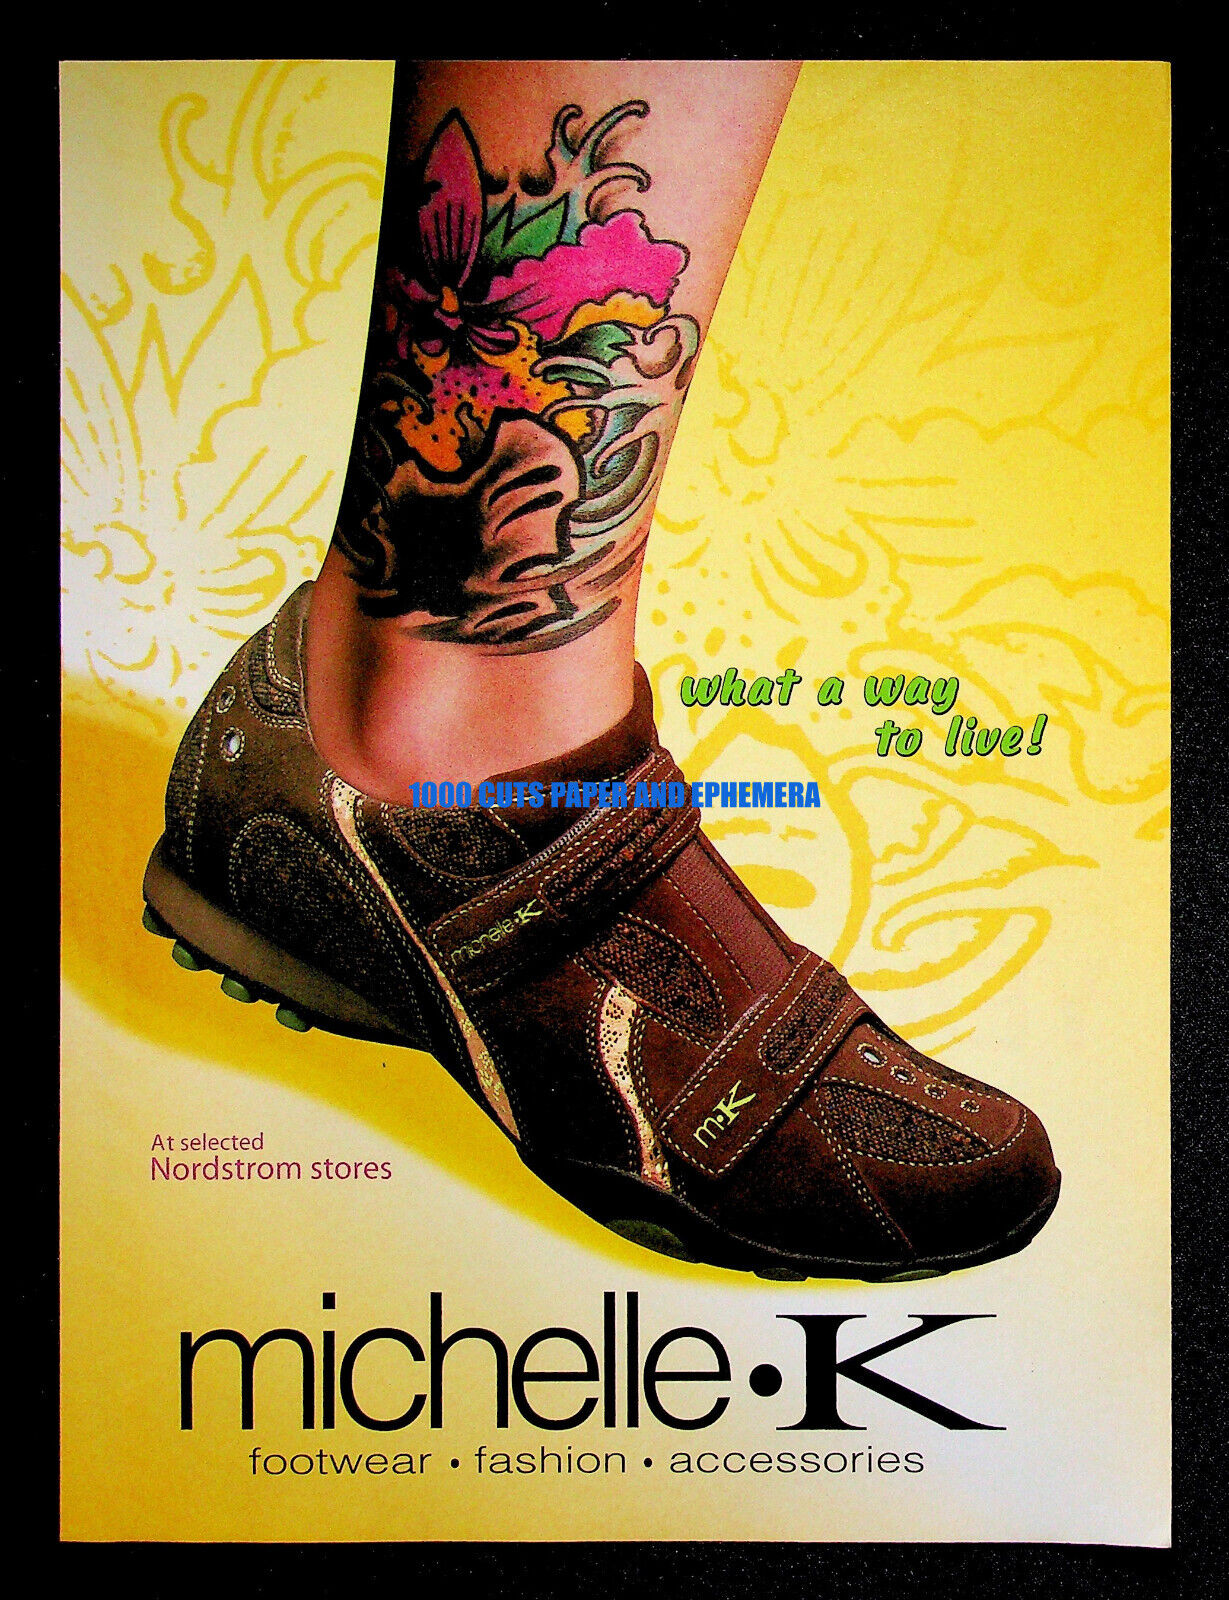 Michelle K Footwear Shoes 2005 Trade Print Magazine Ad Poster ADVERT